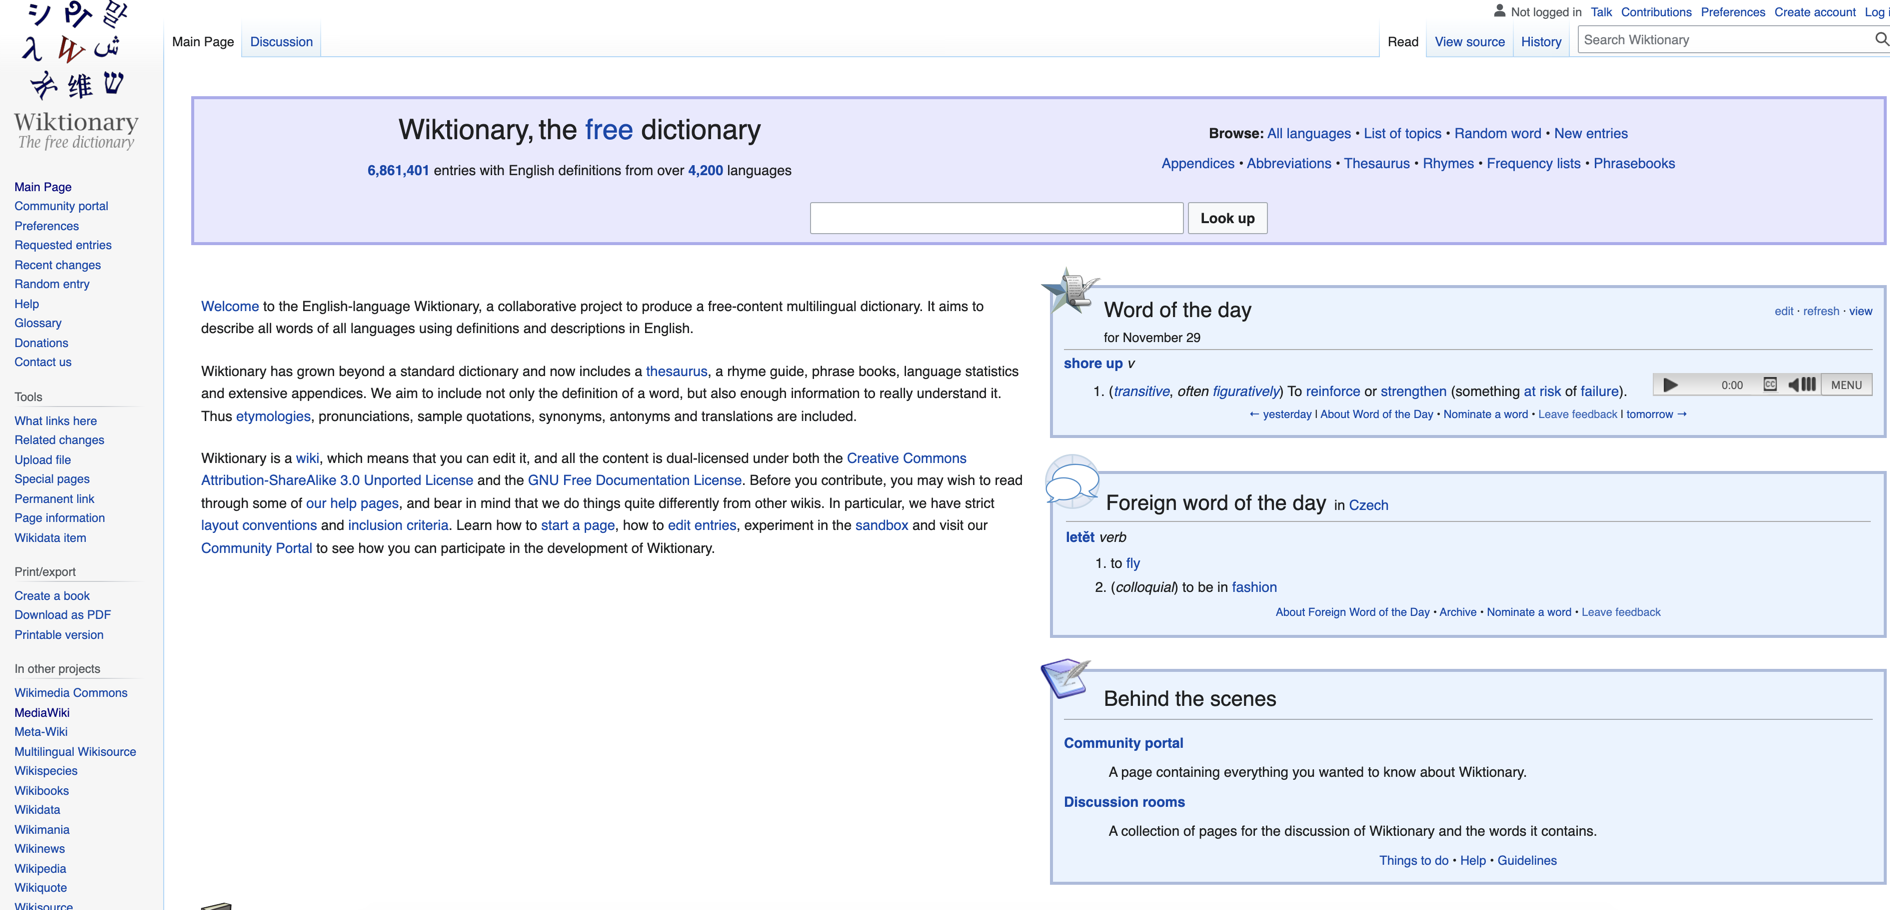 wikitionary wiki example